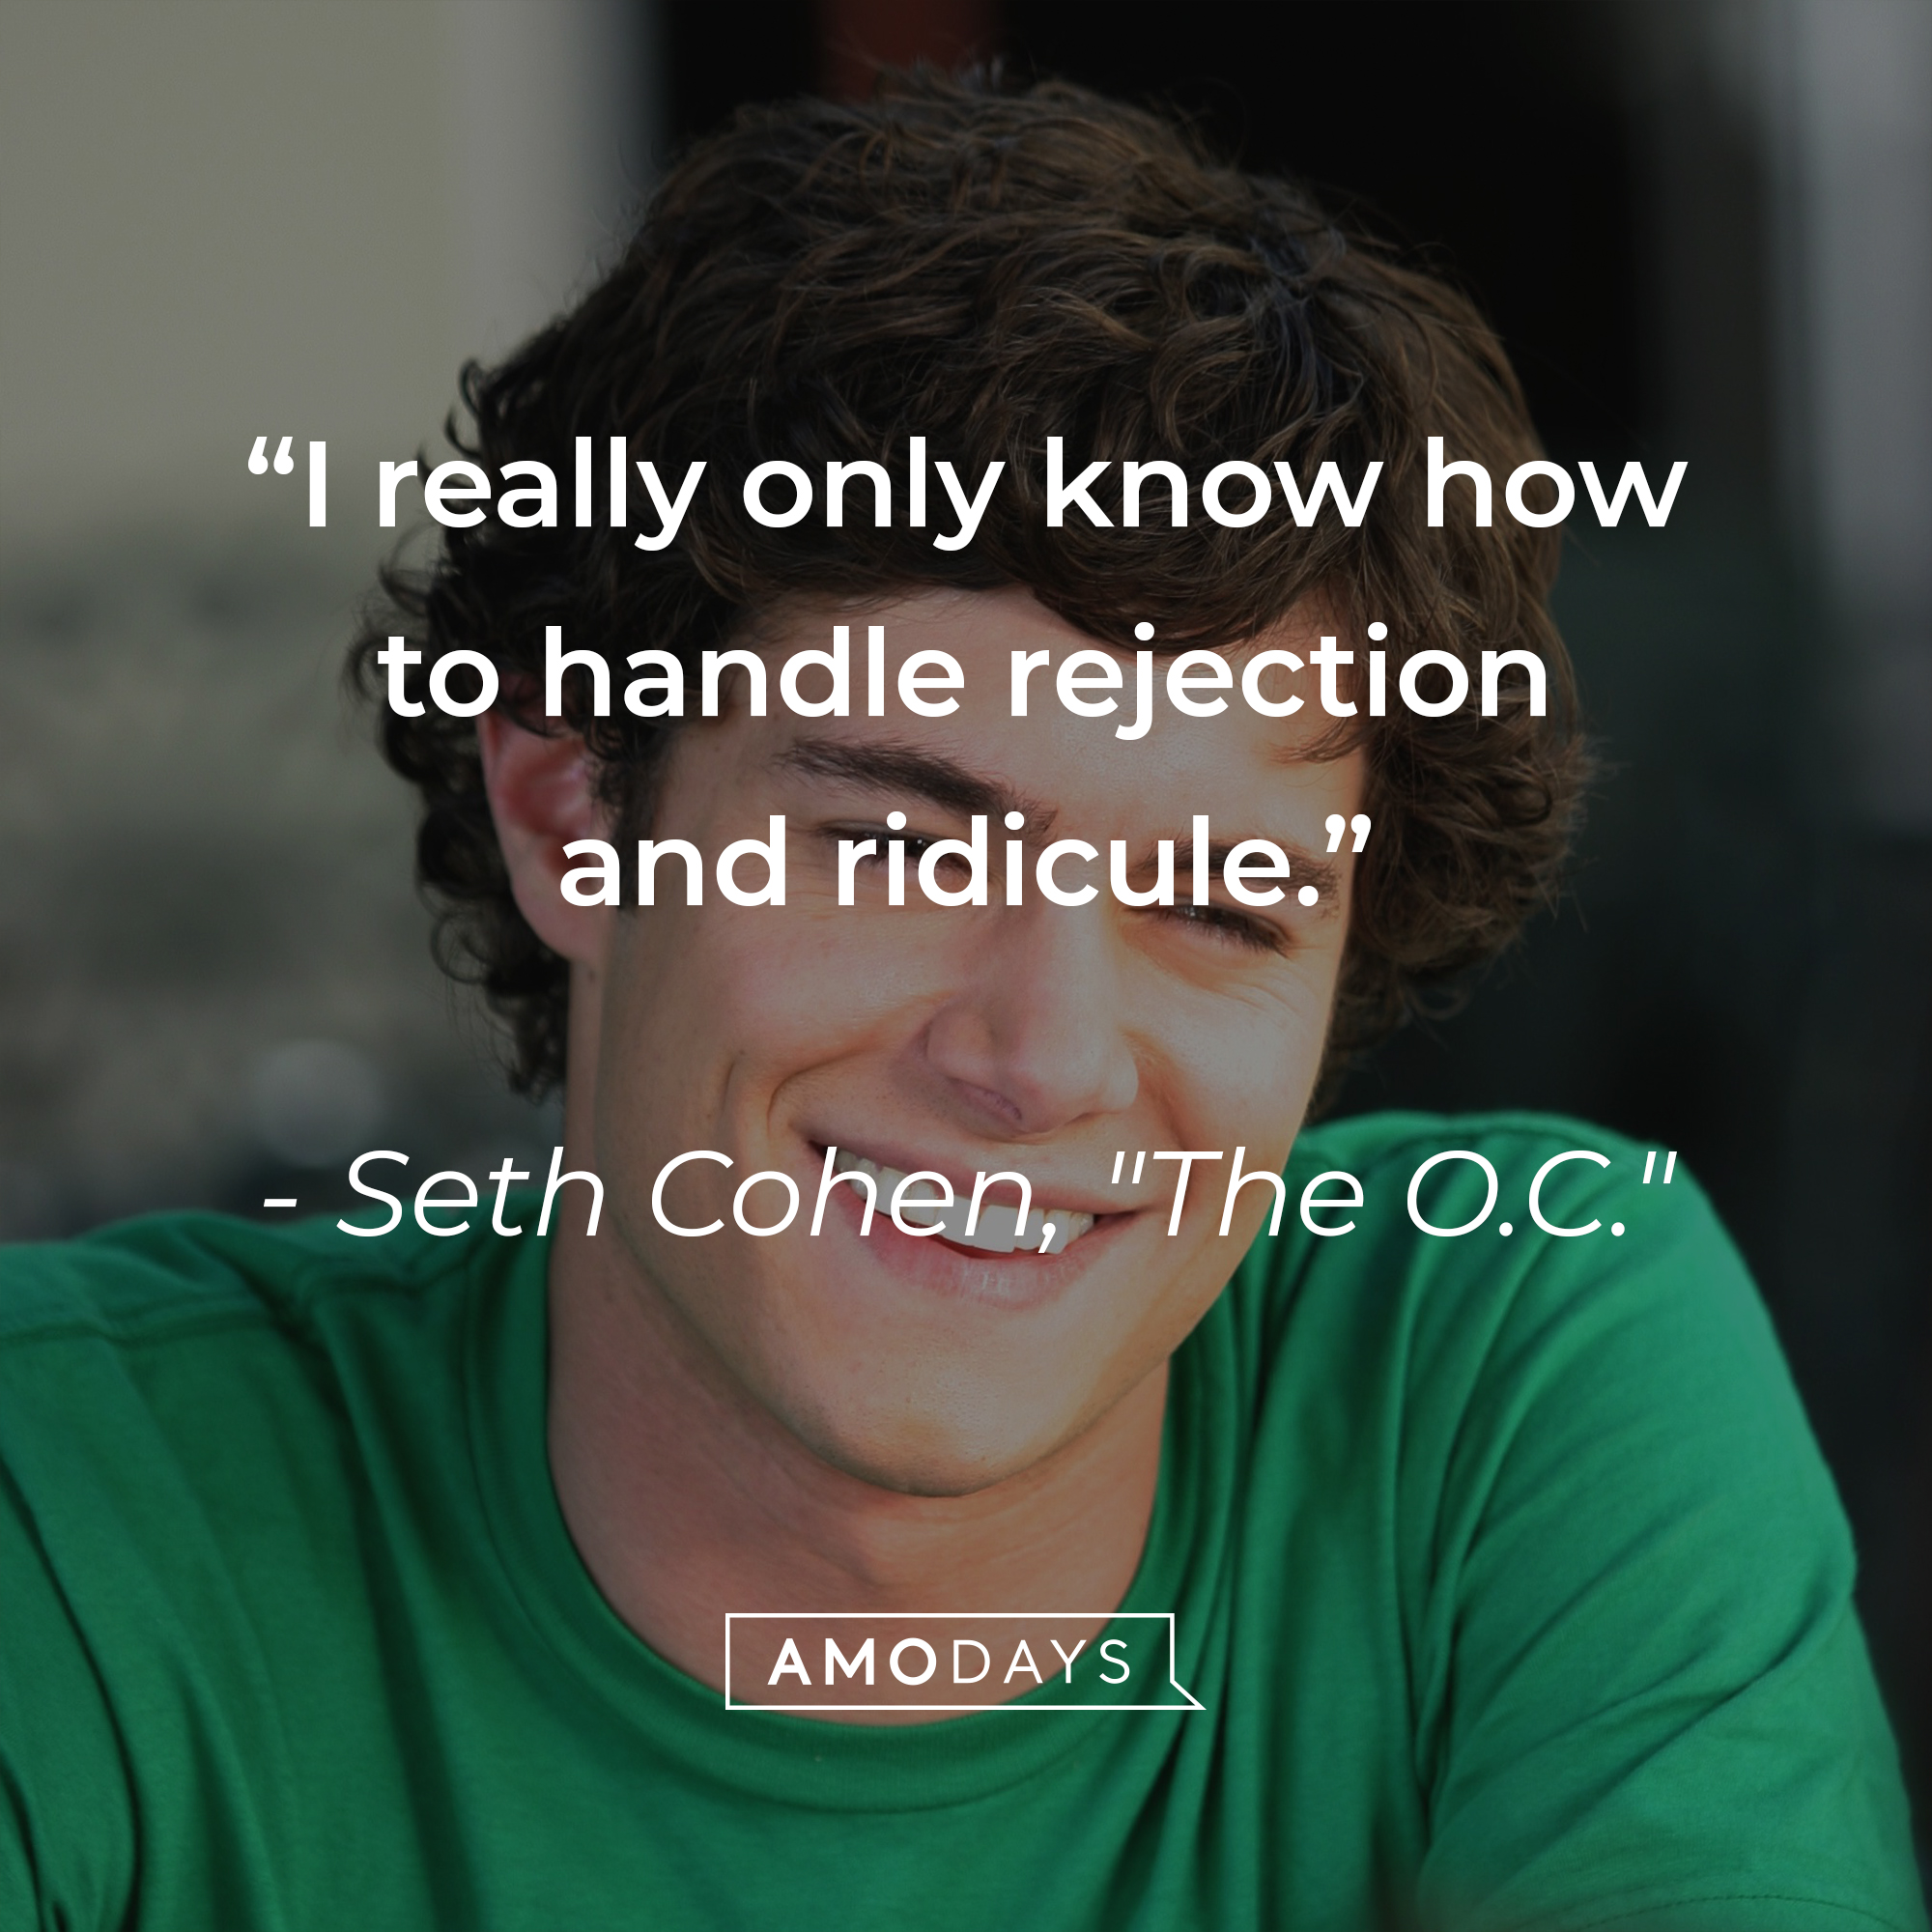 Seth Cohen's quote: "I really only know how to handle rejection and ridicule." | Source: Facebook.com/TheOC